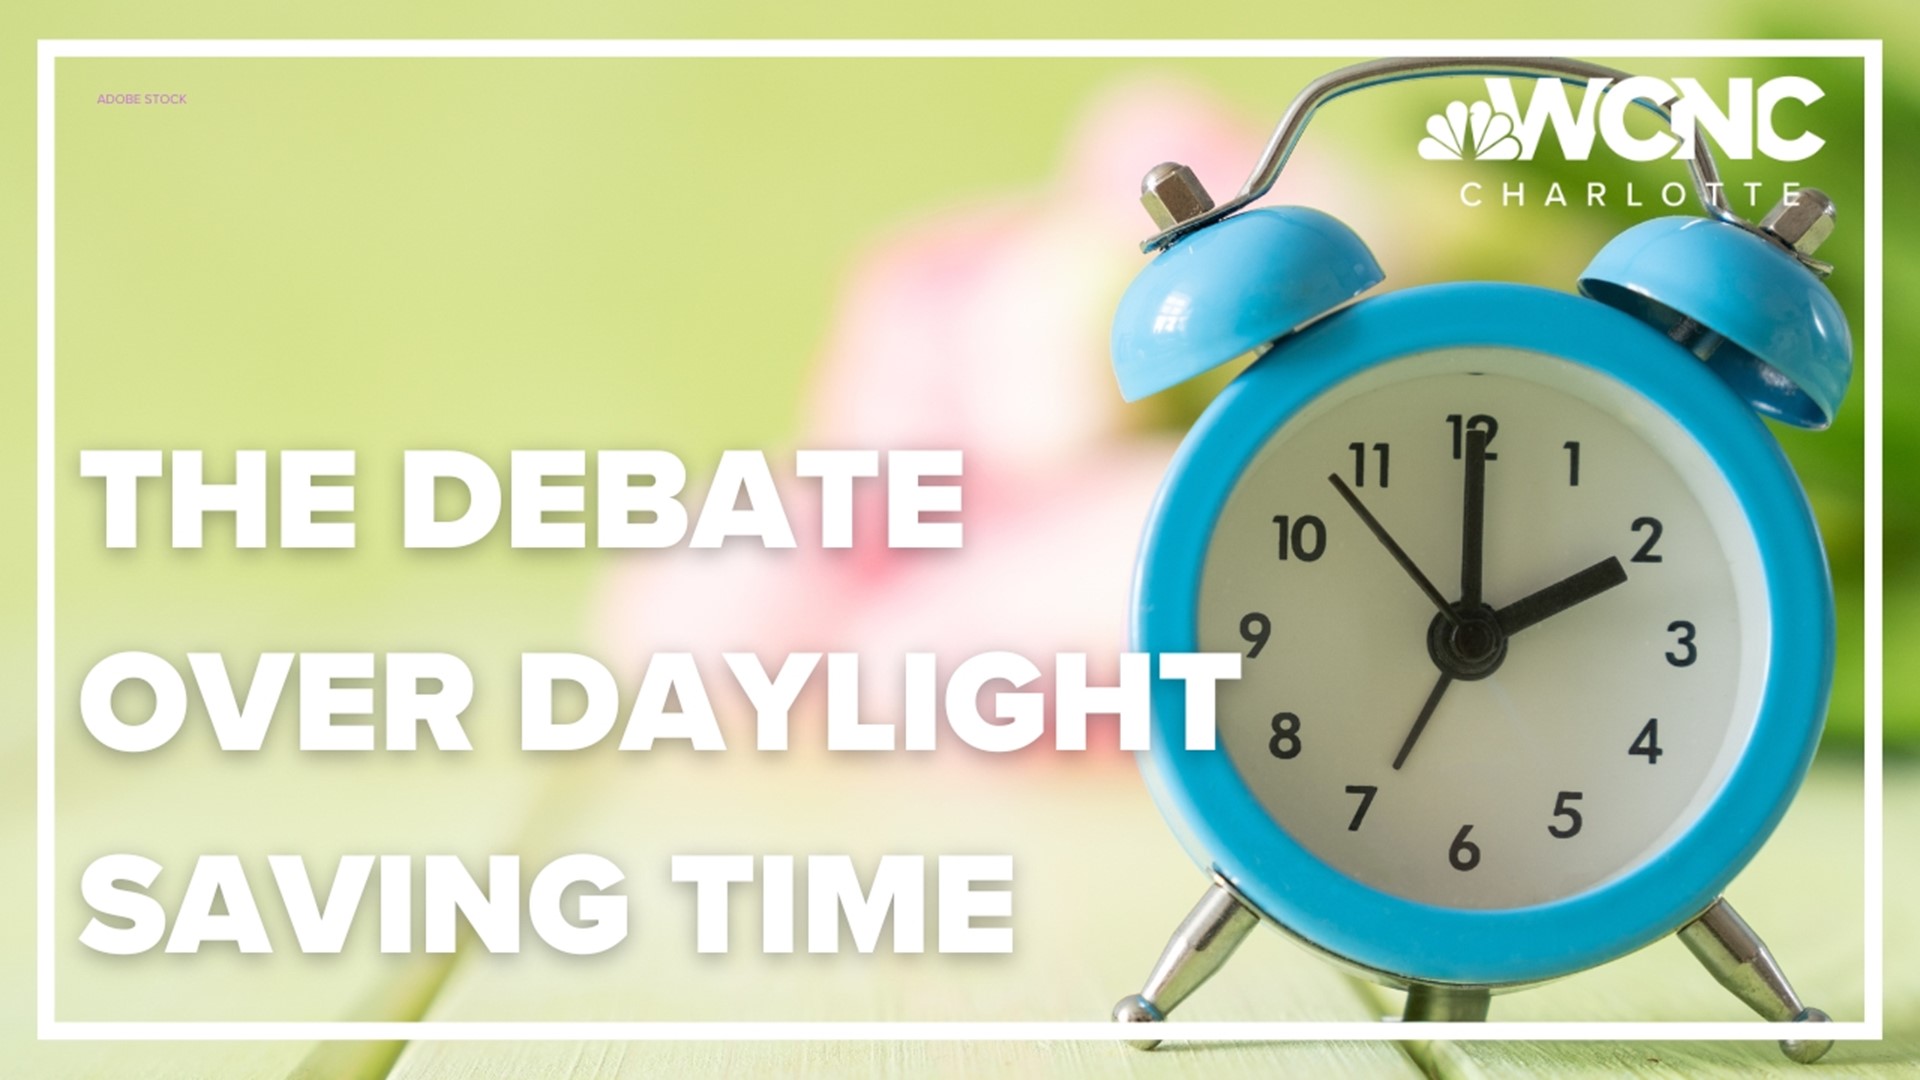 North Carolina lawmakers have filed a bill to make Daylight Saving Time permanent.